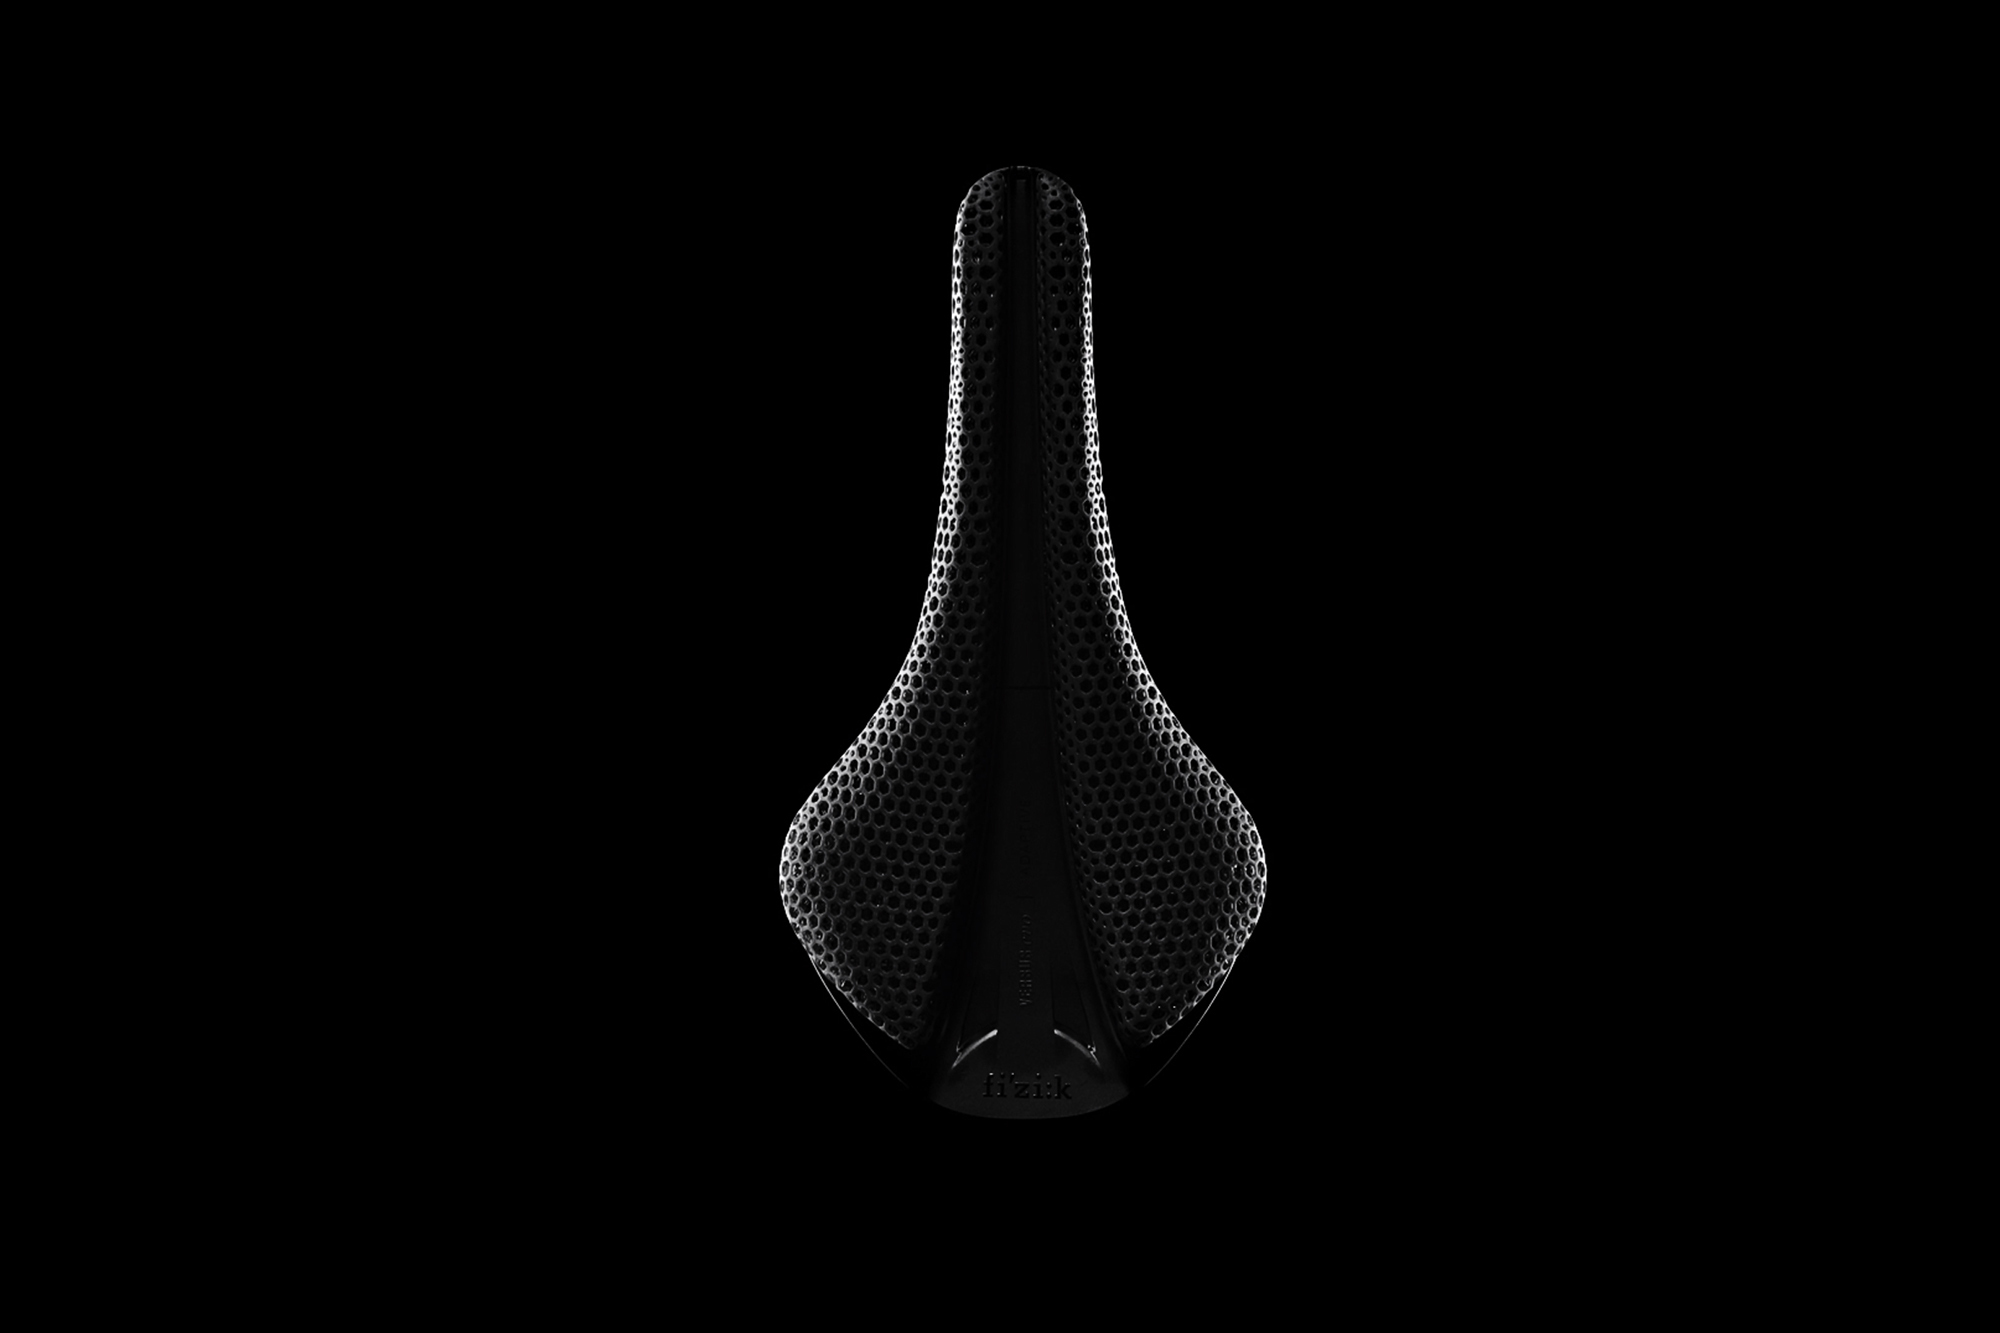 3D printed saddles are becoming more affordable with Fizik's new